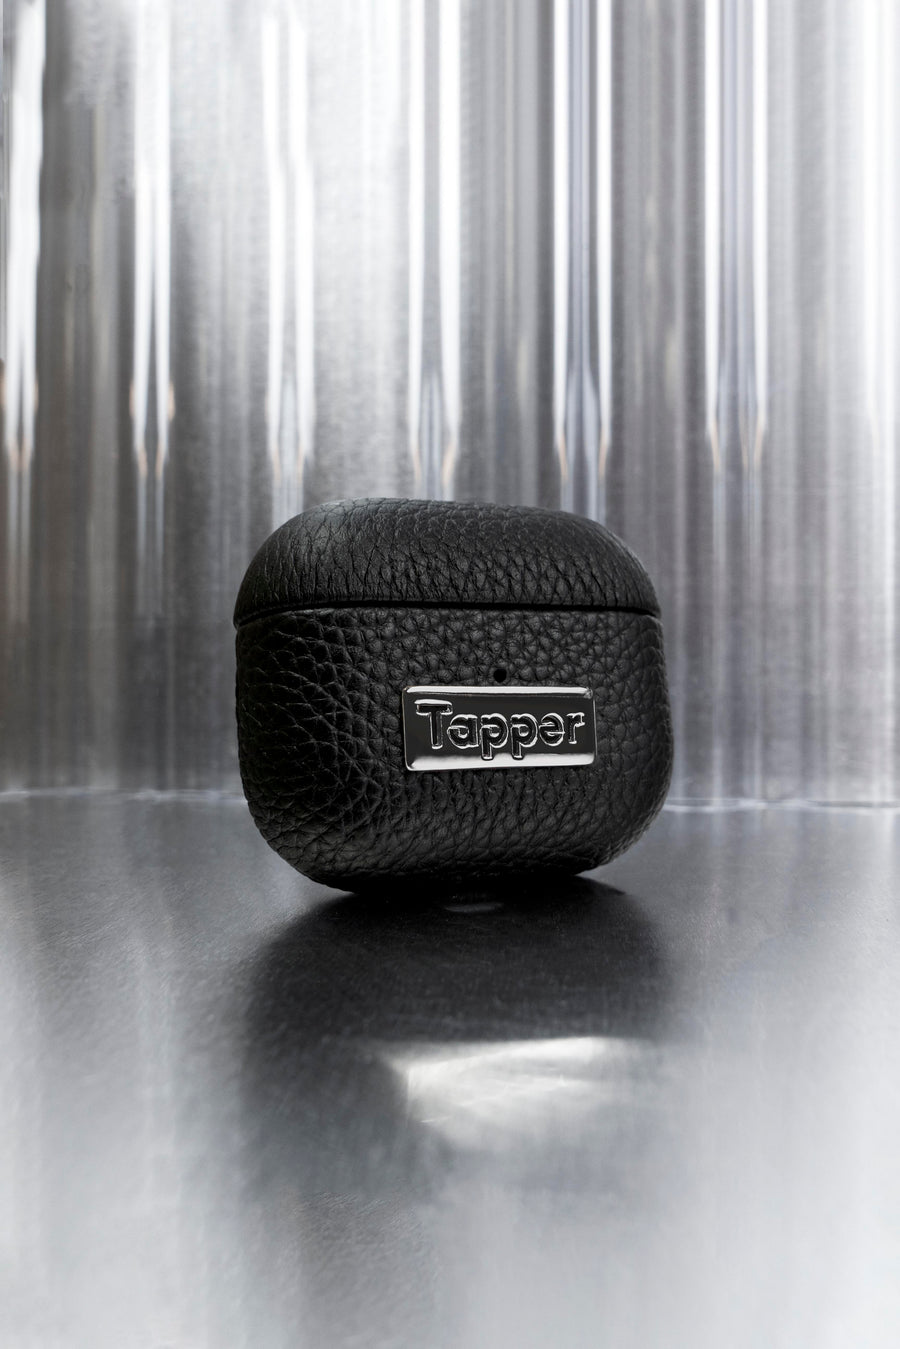 Tapper's luxurious black genuine cow leather AirPods case protects and elevates the look of your AirPods. The luxurious, protective case for AirPods with a metal logo plate in hematite black plating steps up your AirPods game. The next must-have high end protective Apple AirPods accessory in real leather and precious metals. Compatible with AirPods (3rd generation). Designed in Sweden by Tapper. Free Express Shipping at gettapper.com